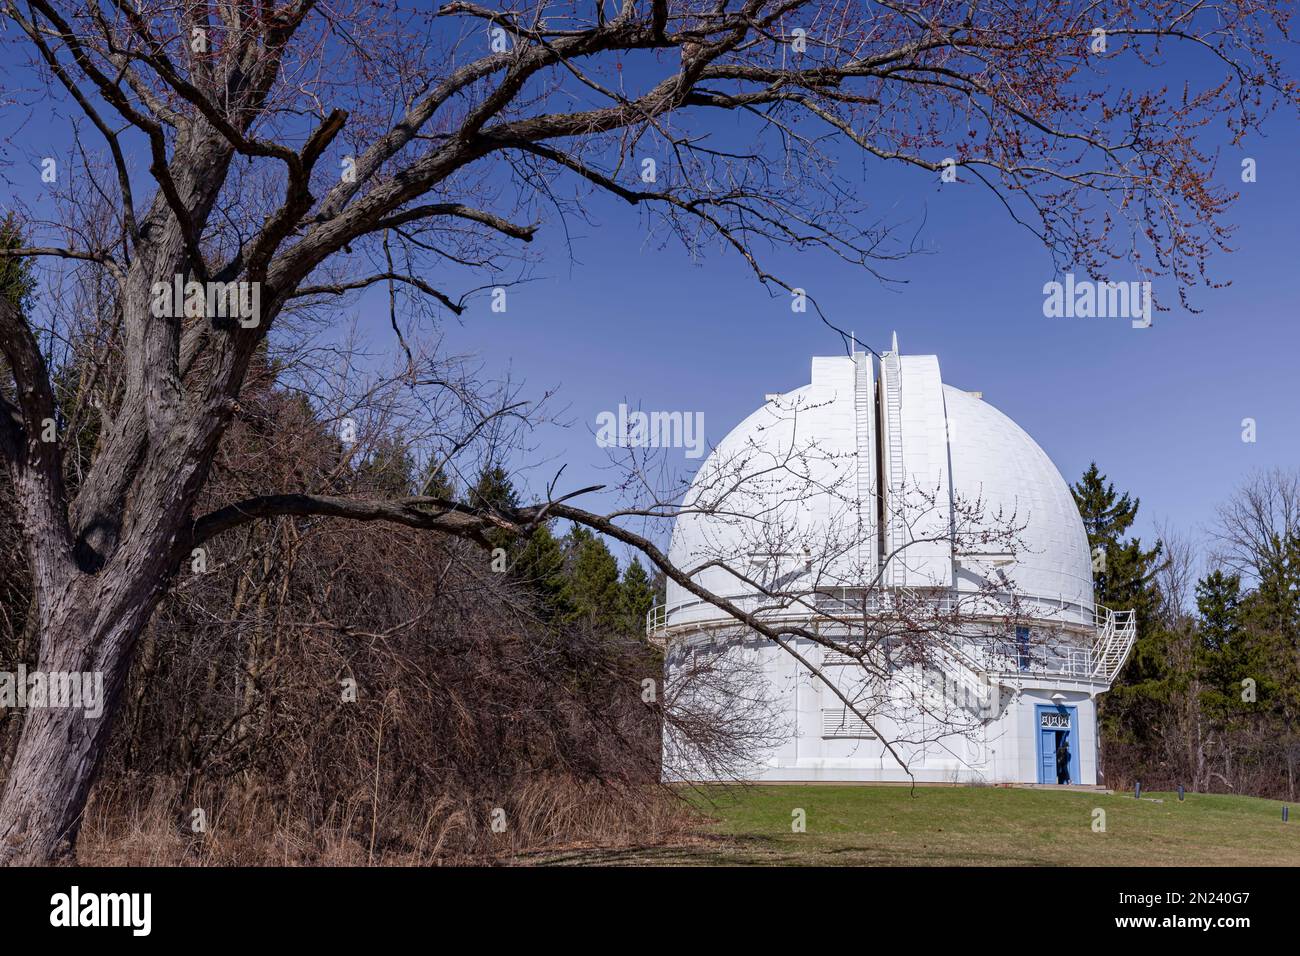 The largest dome of the four at the David Dunlap Observatory waits for night to begin. Stock Photo